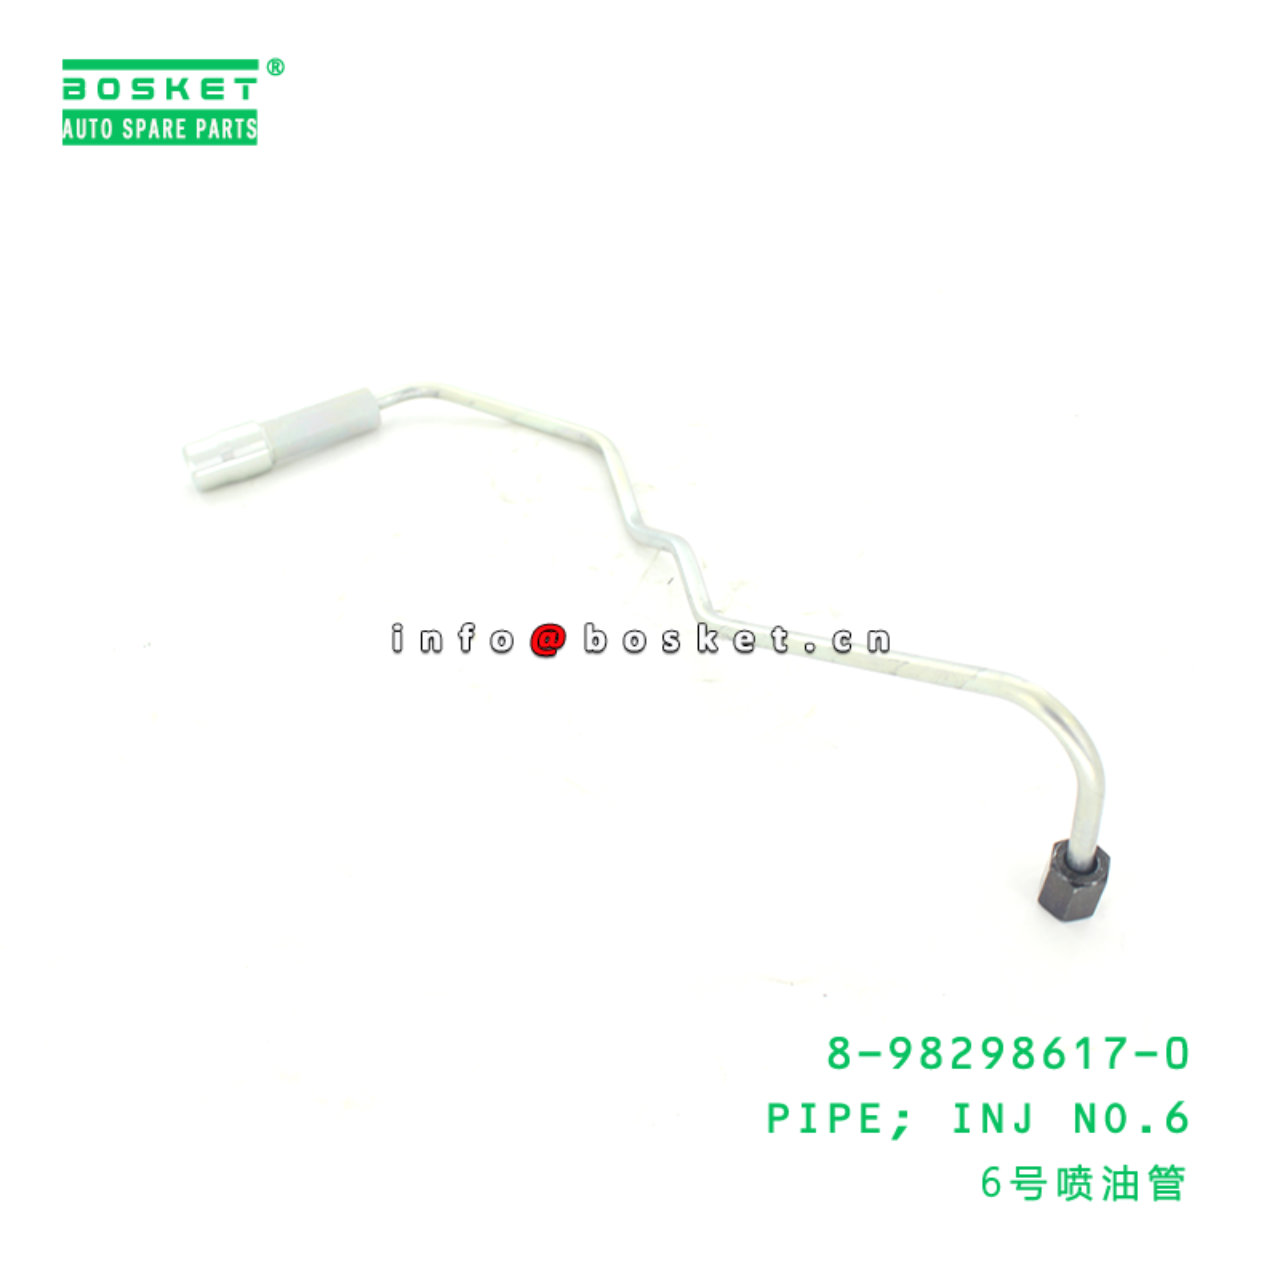 8-98298617-0 Injecting No.6 Pipe 8982986170 Suitable for ISUZU FRR